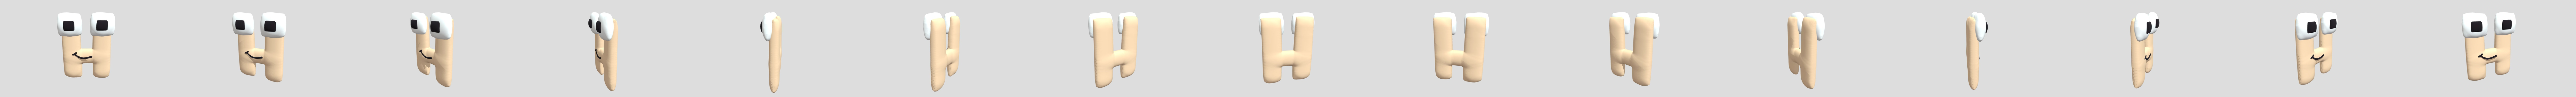 Harrymations Д (Russian Alphabet Lore) - Download Free 3D model by  aniandronic (@aniandronic) [c5d4c5e]